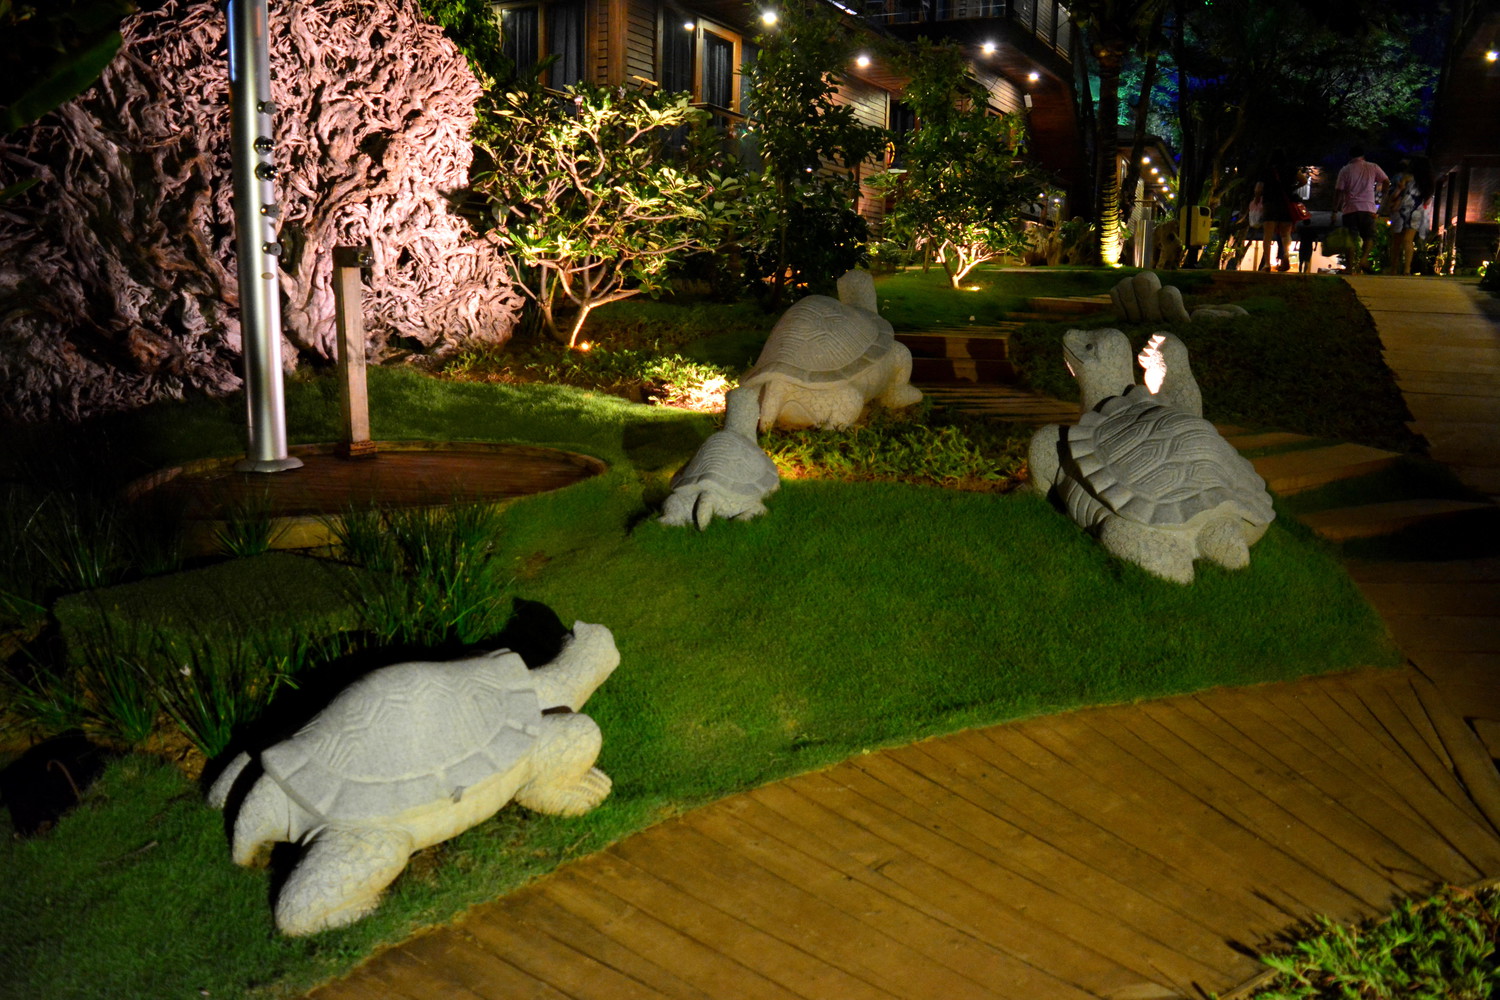 Tortoise sculptures made of stone on green lawn, wooden pavement, and wooden hotel rooms in a resort lit with orange lamps at night